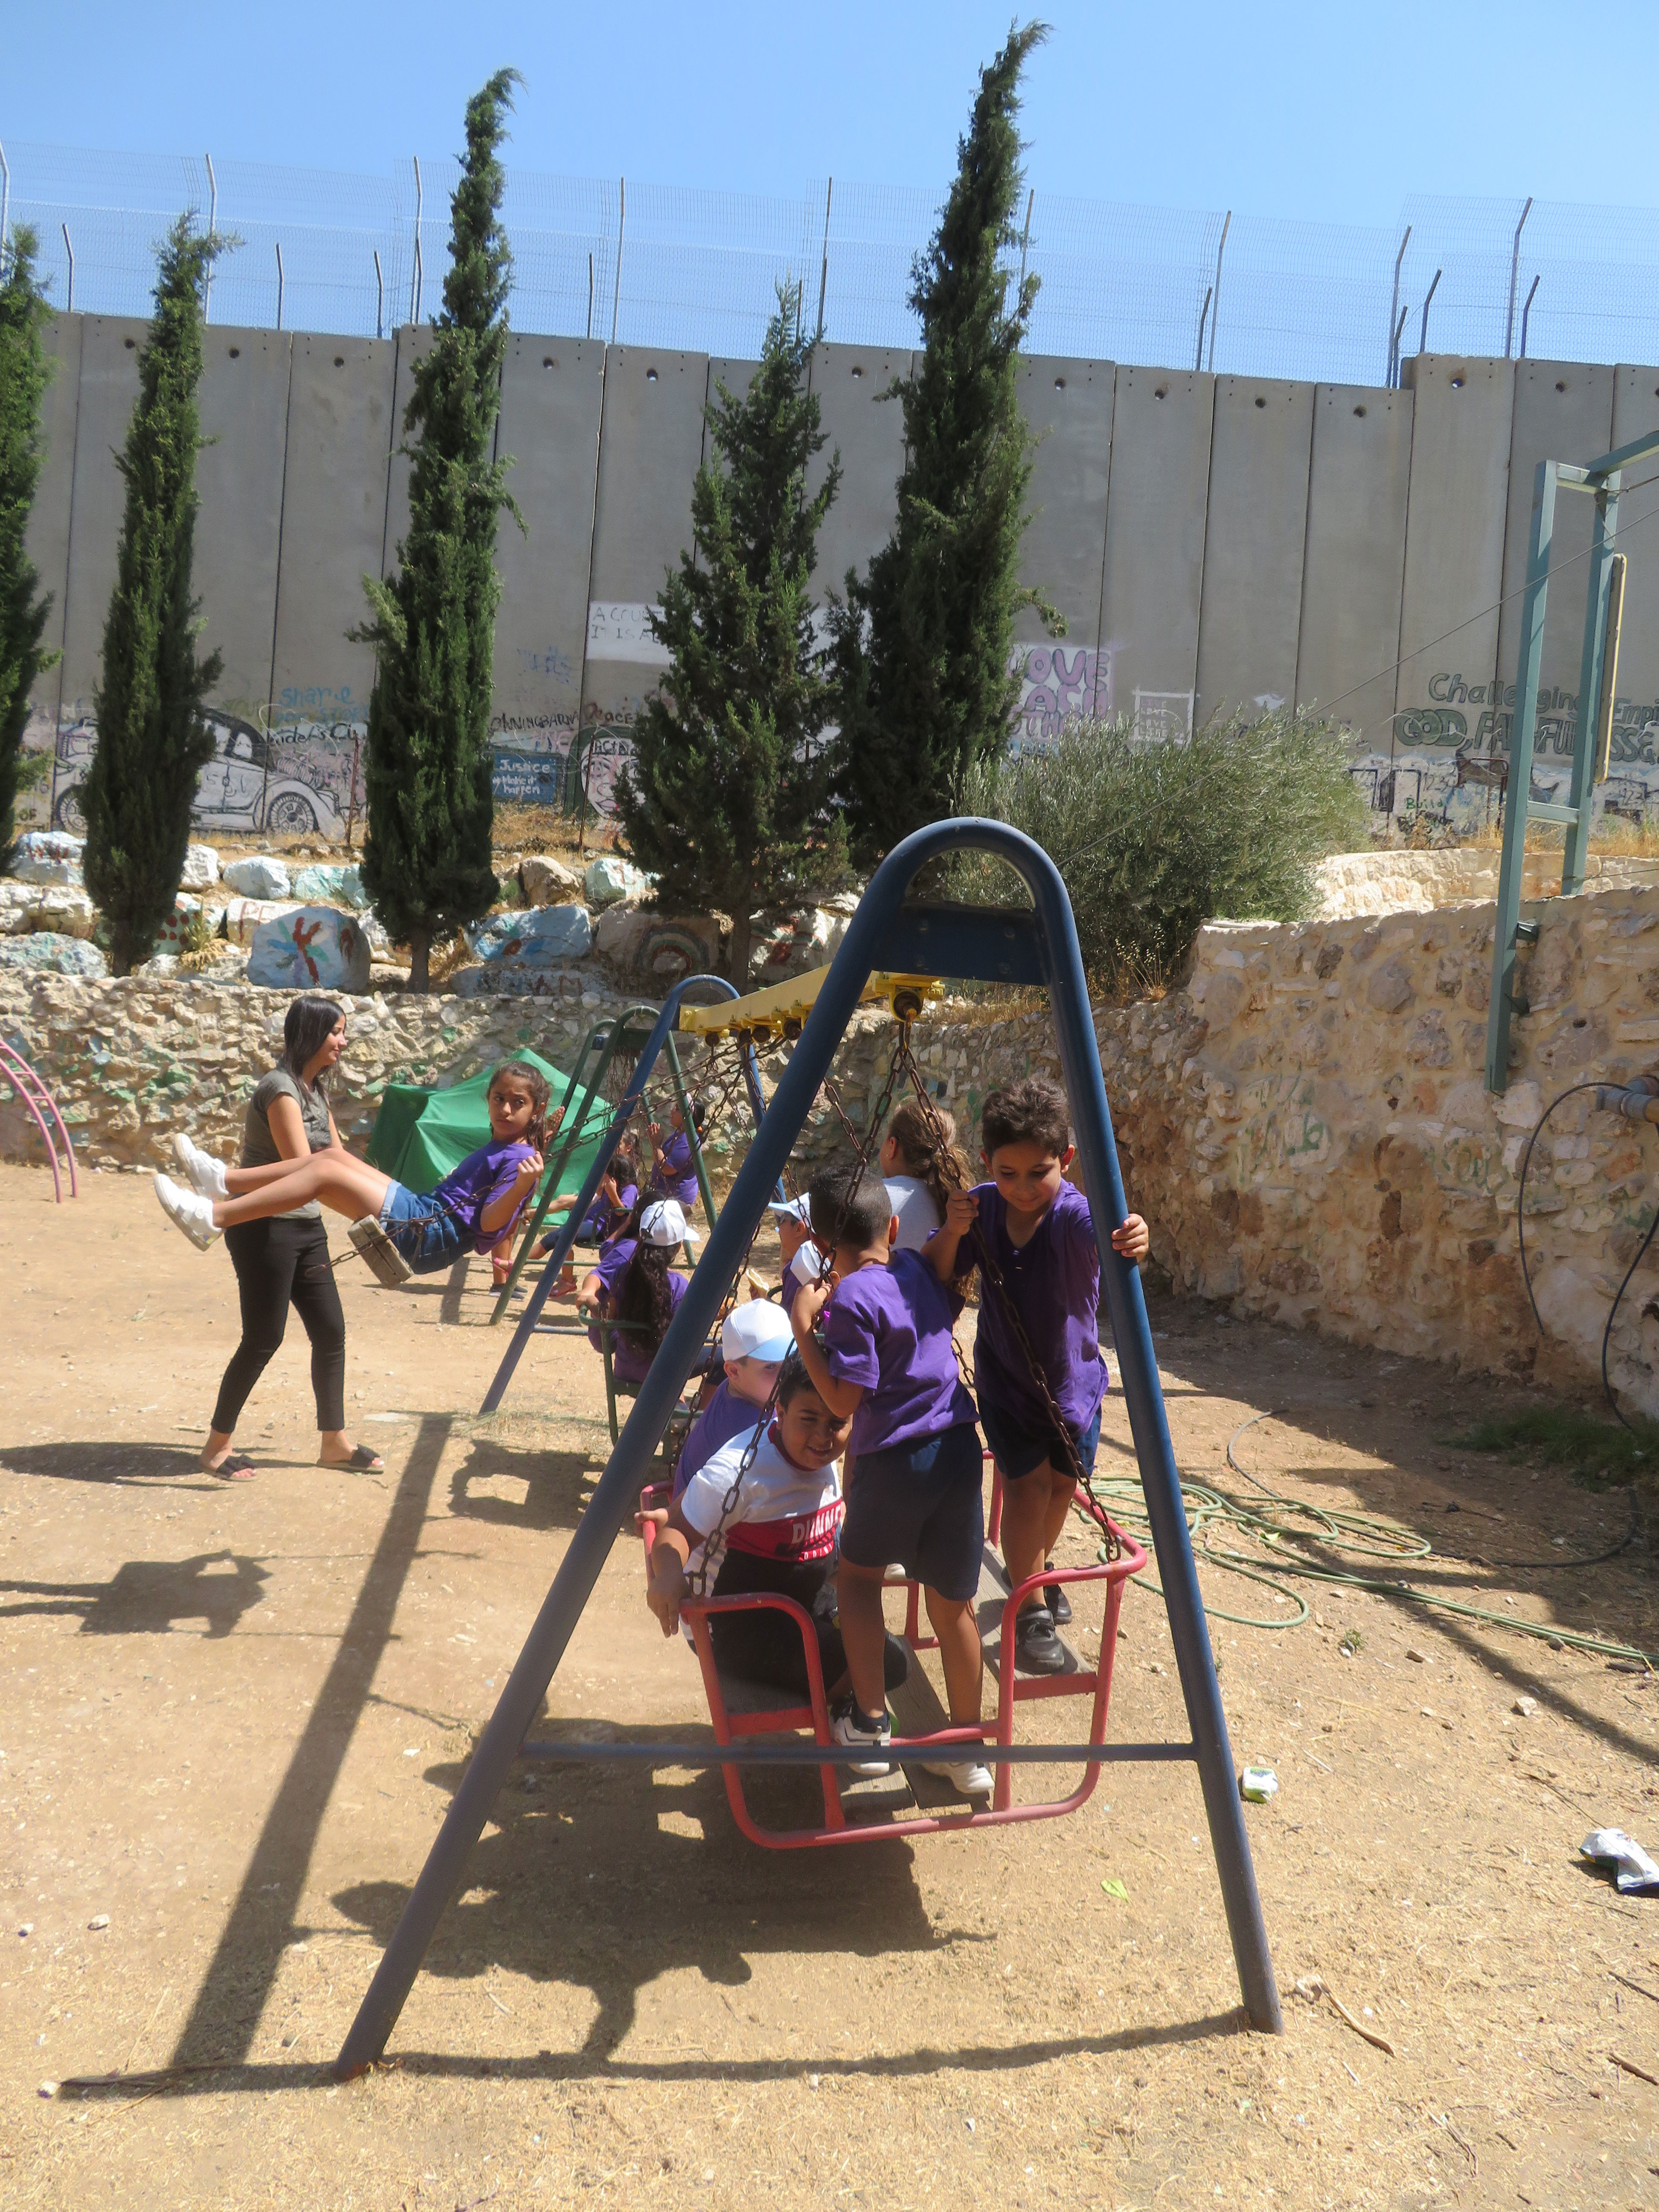 In the shadow of Israel’s Separation Barrier/Wall, a summer camp for Palestinian children at the Wi’am Palestinian Conflict Transformation Center